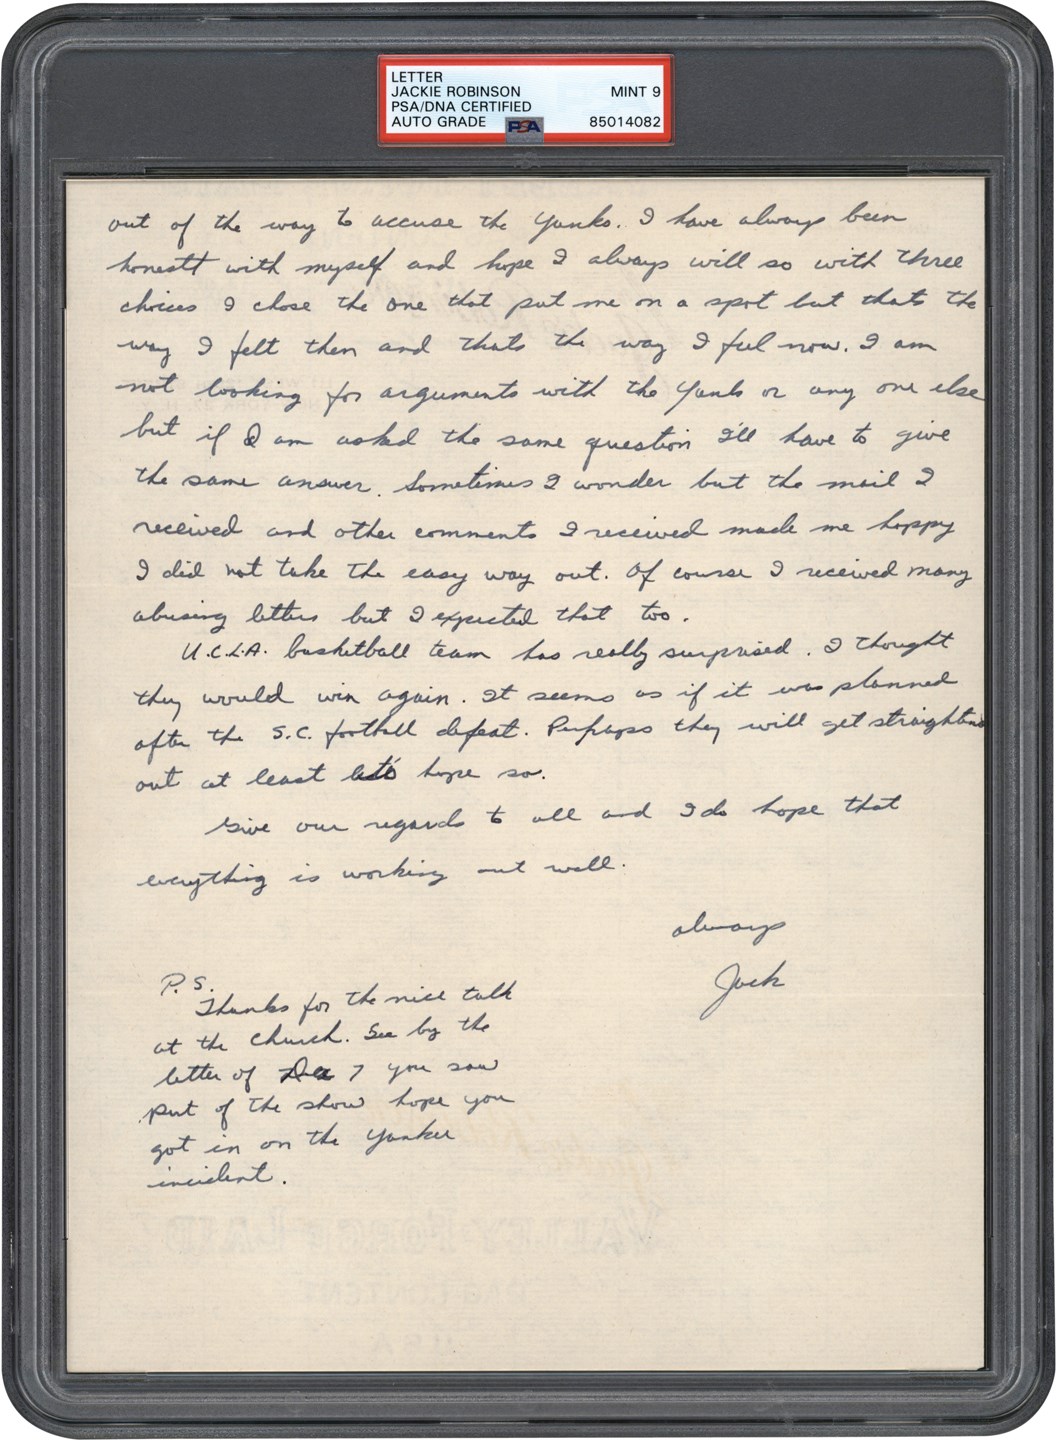 - 1953 Jackie Robinson Handwritten Letter in Which He Defends His Recent Comment Describing the New York Yankees Management as "Prejudice (sic)" (PSA MINT 9)